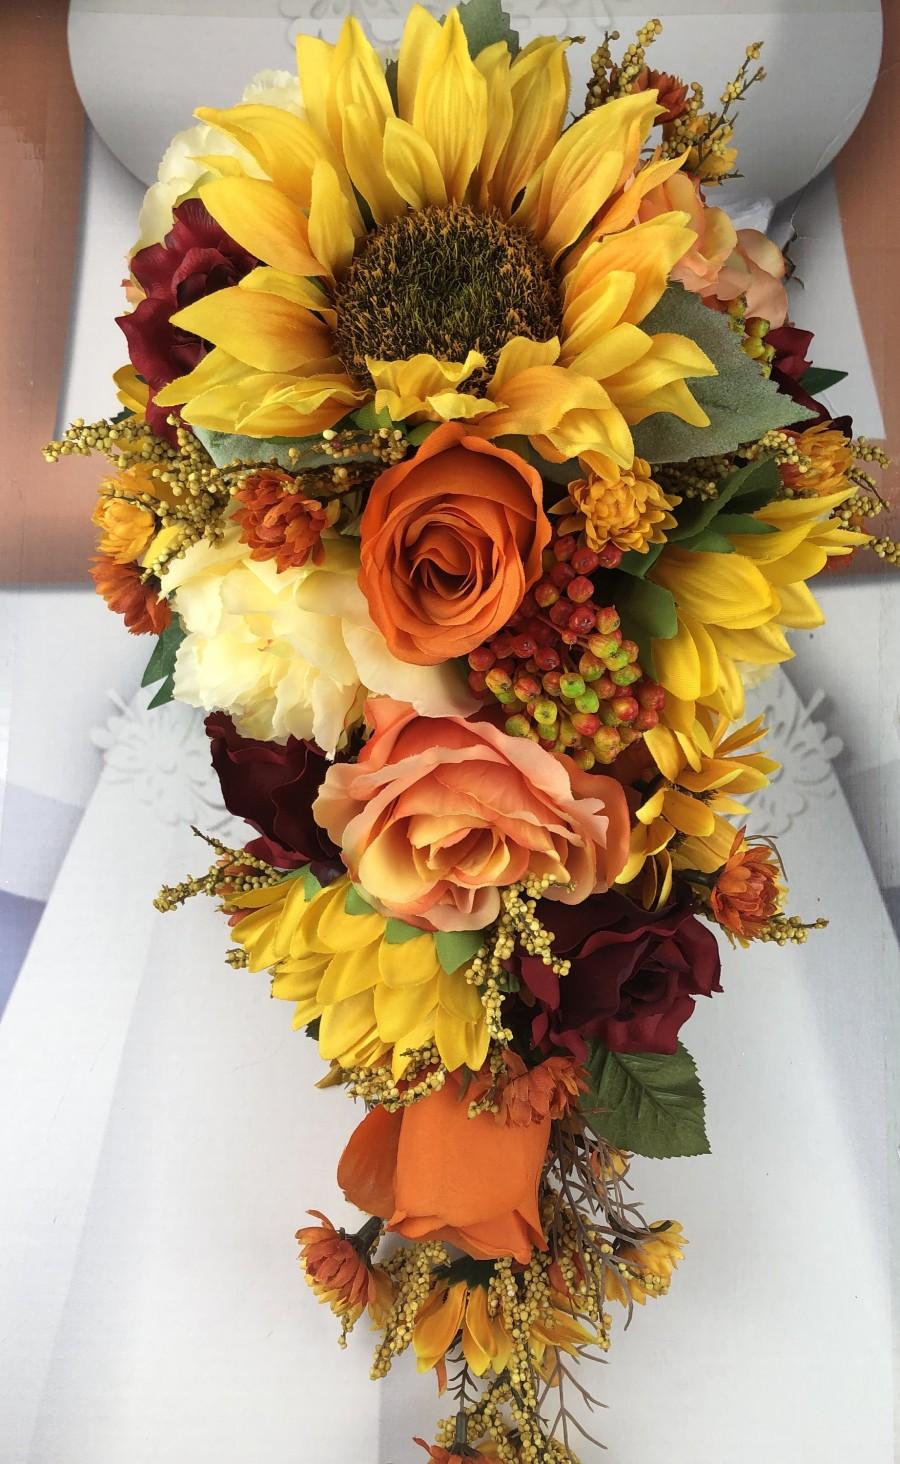 Mariage - Red Fall in Love Sunflower Bridal Bouquet Set, Fall Sunflower Bridal Flowers, Red Rose Sunflower Wedding Flowers